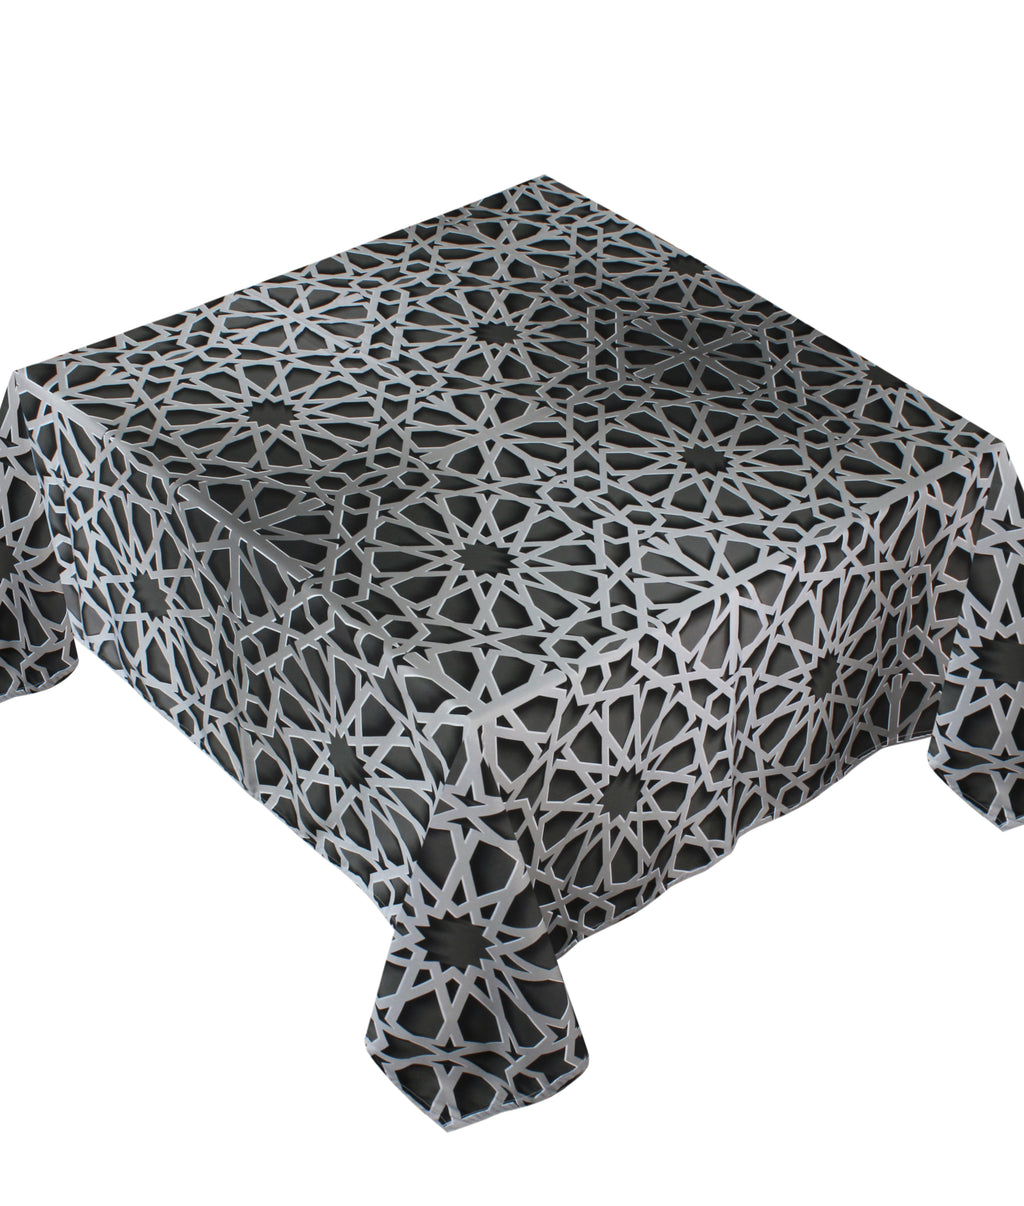 The 3D Islamic table cover